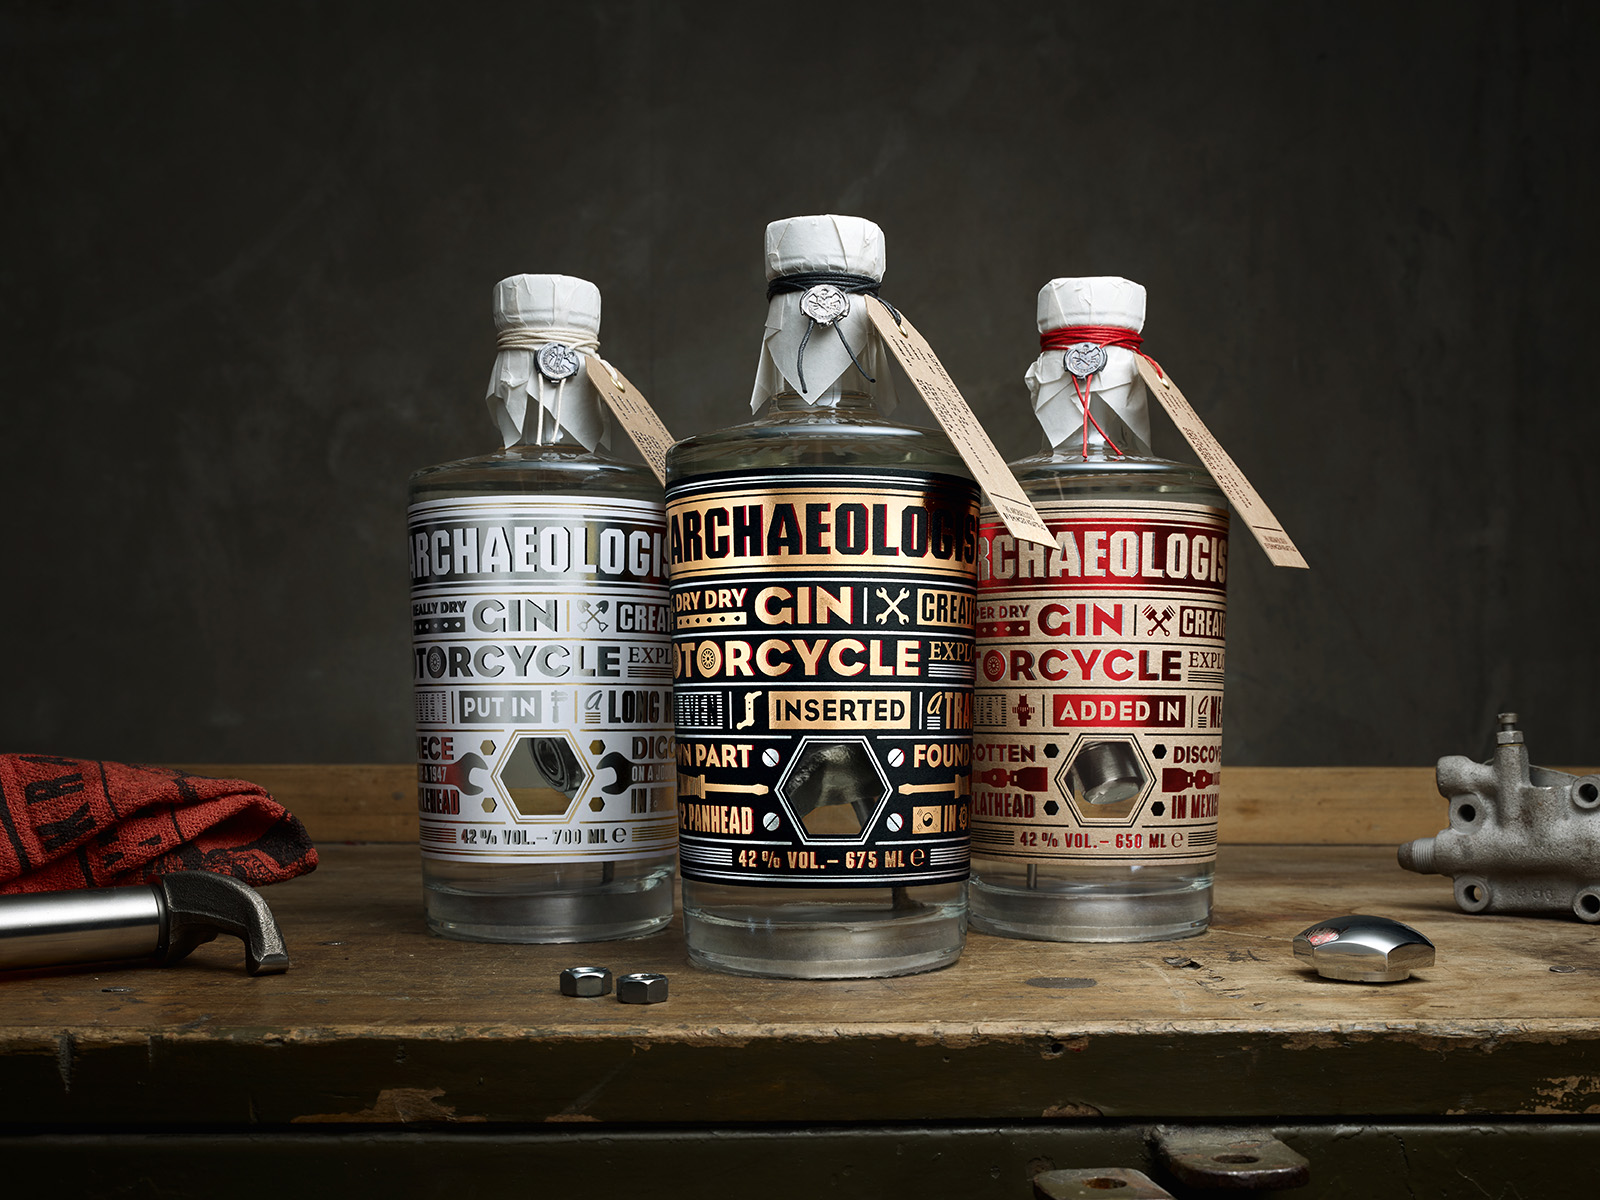 The Archaelogist Gin